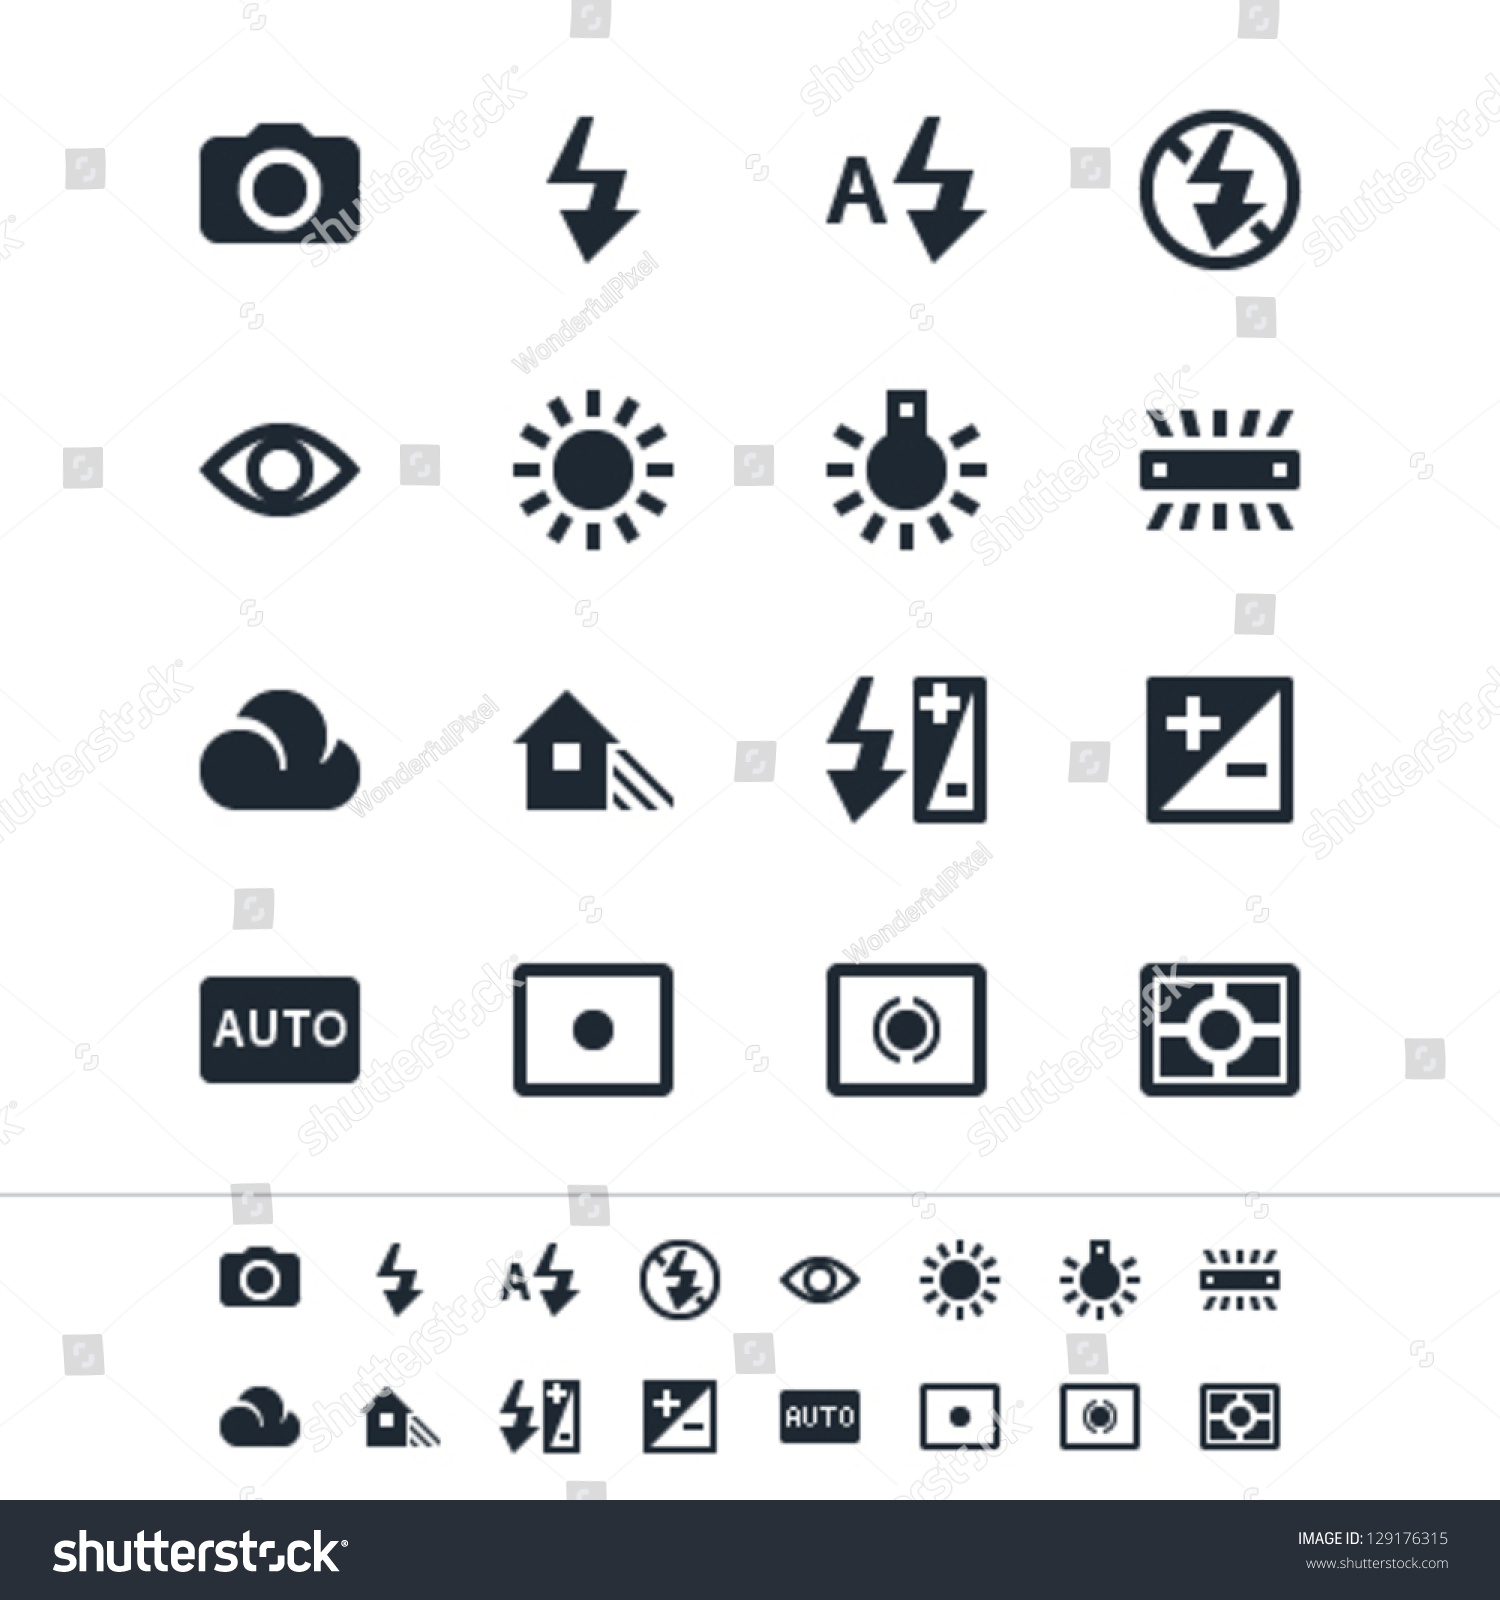 SVG of Photography icons svg